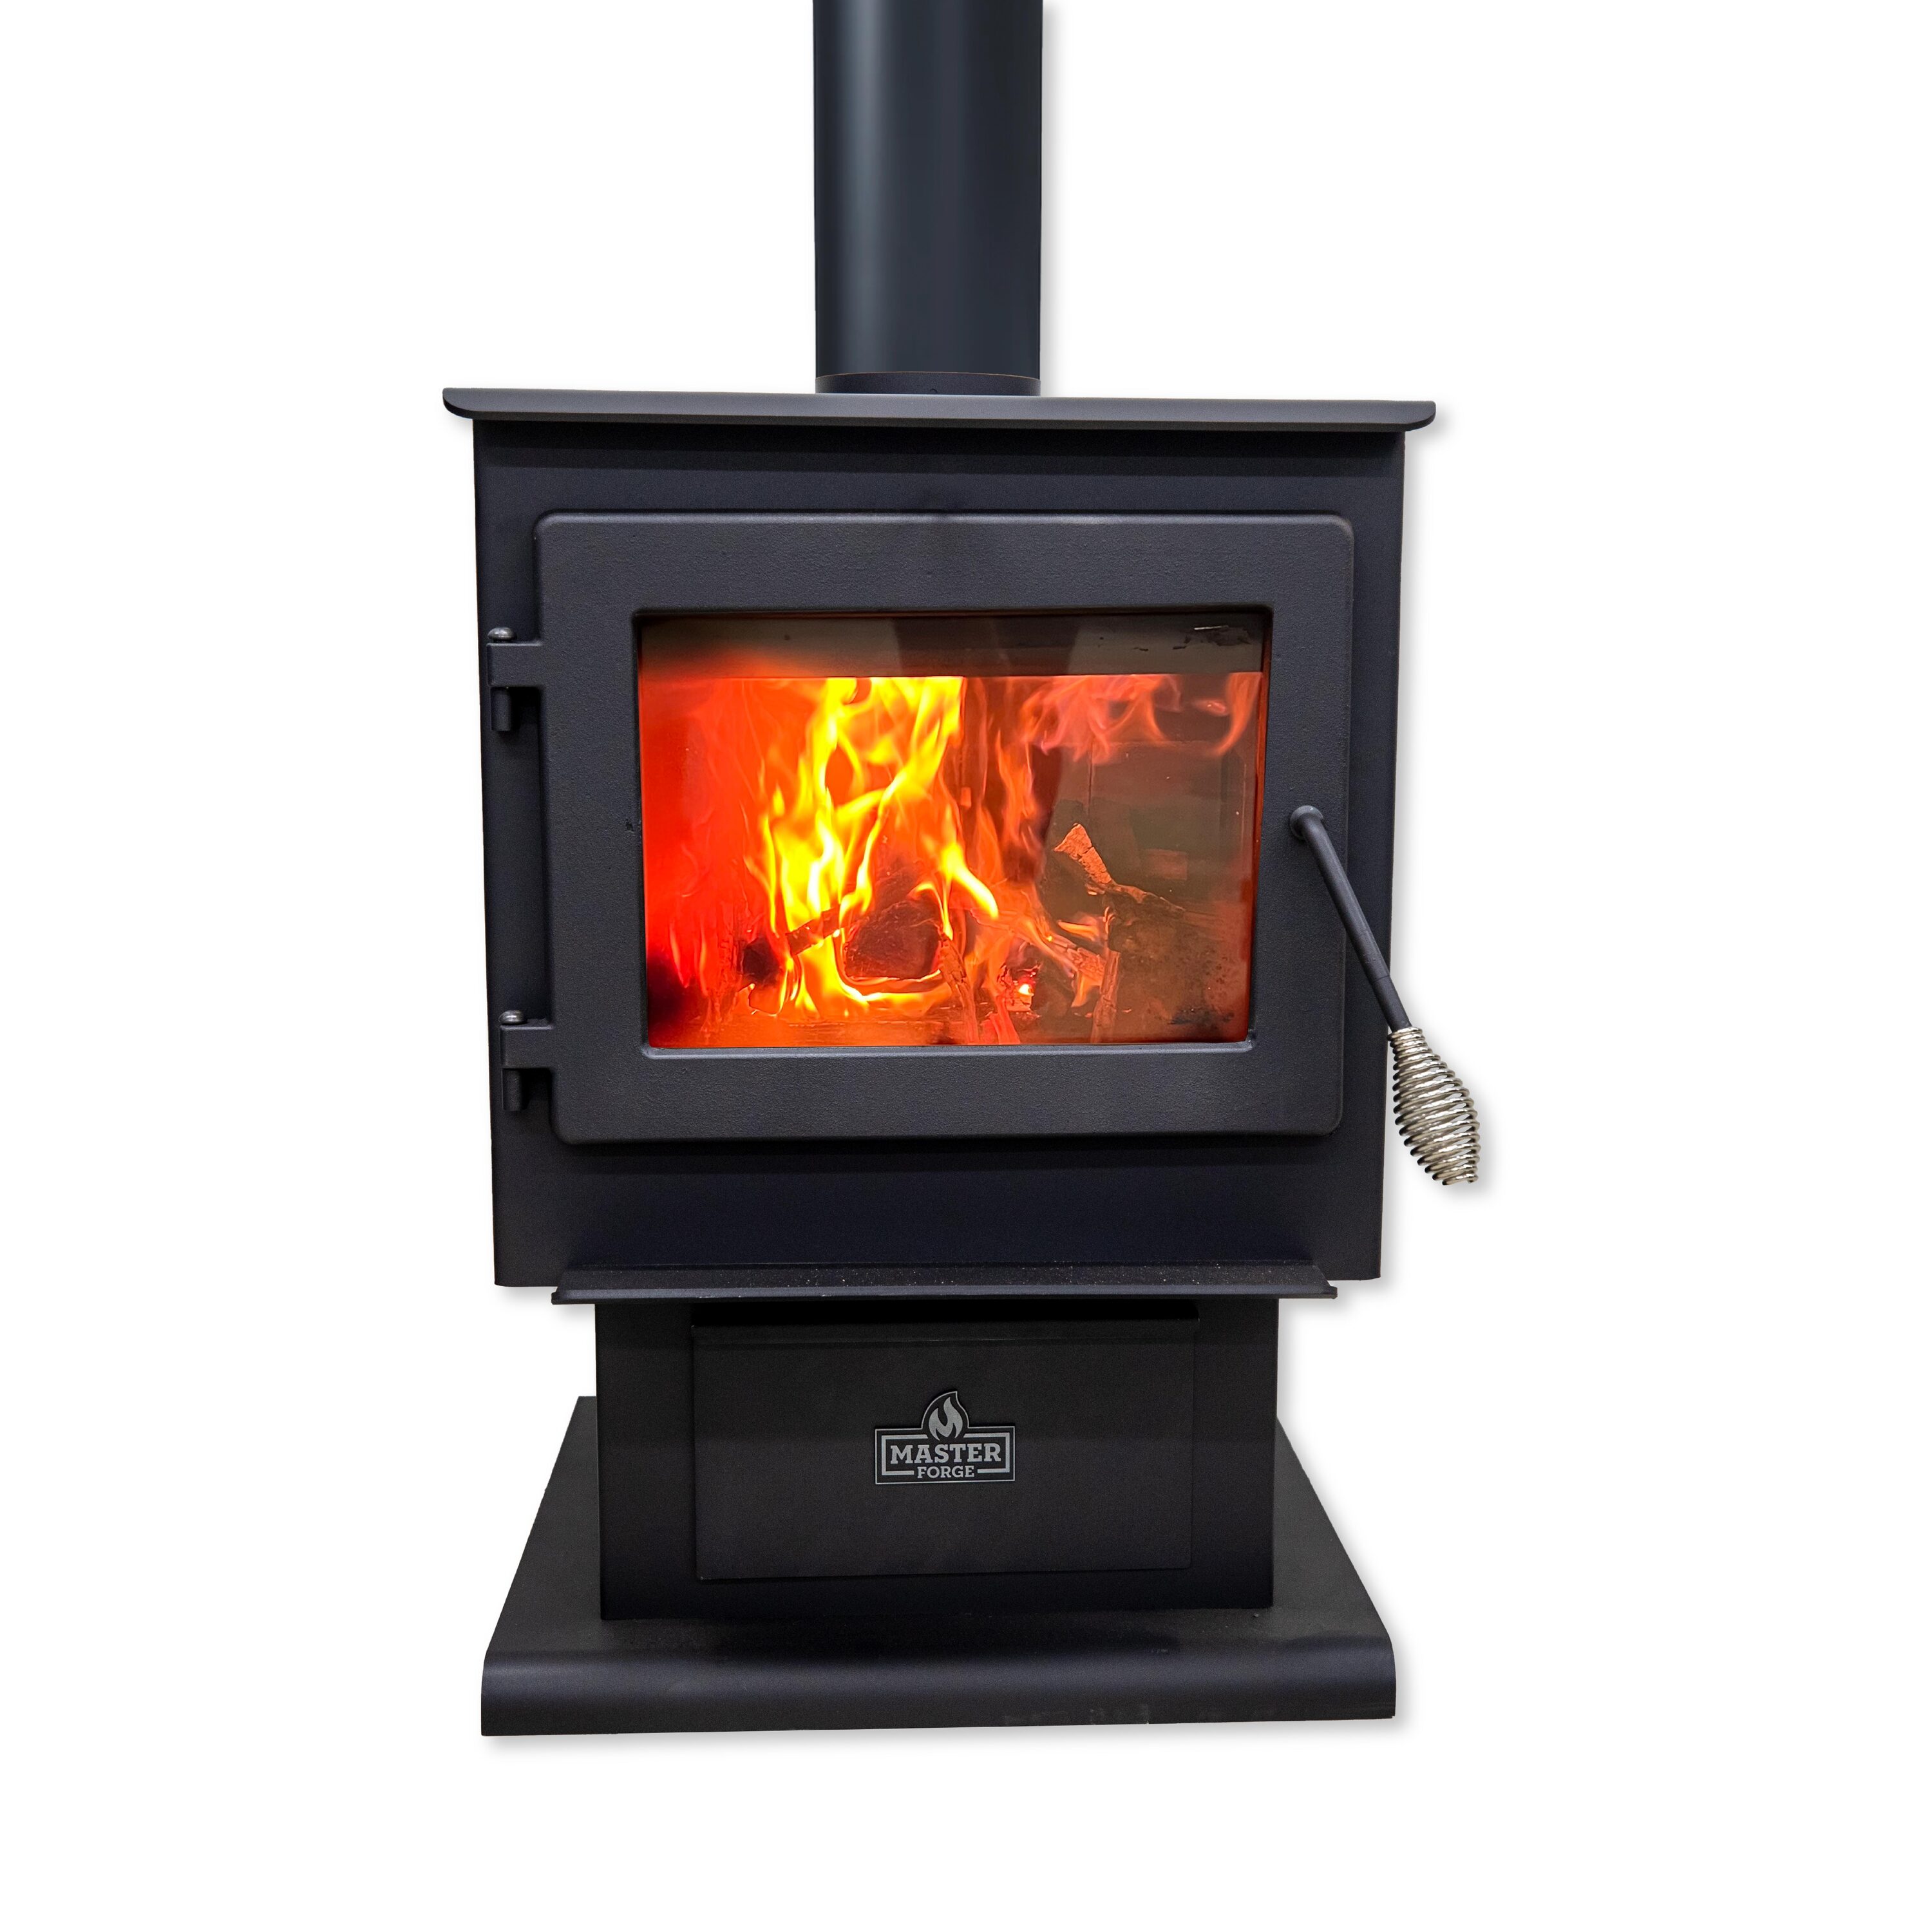 Fire accessories and cleaning products for Wood-Burners and Multi-fuel  Stoves and Cookers